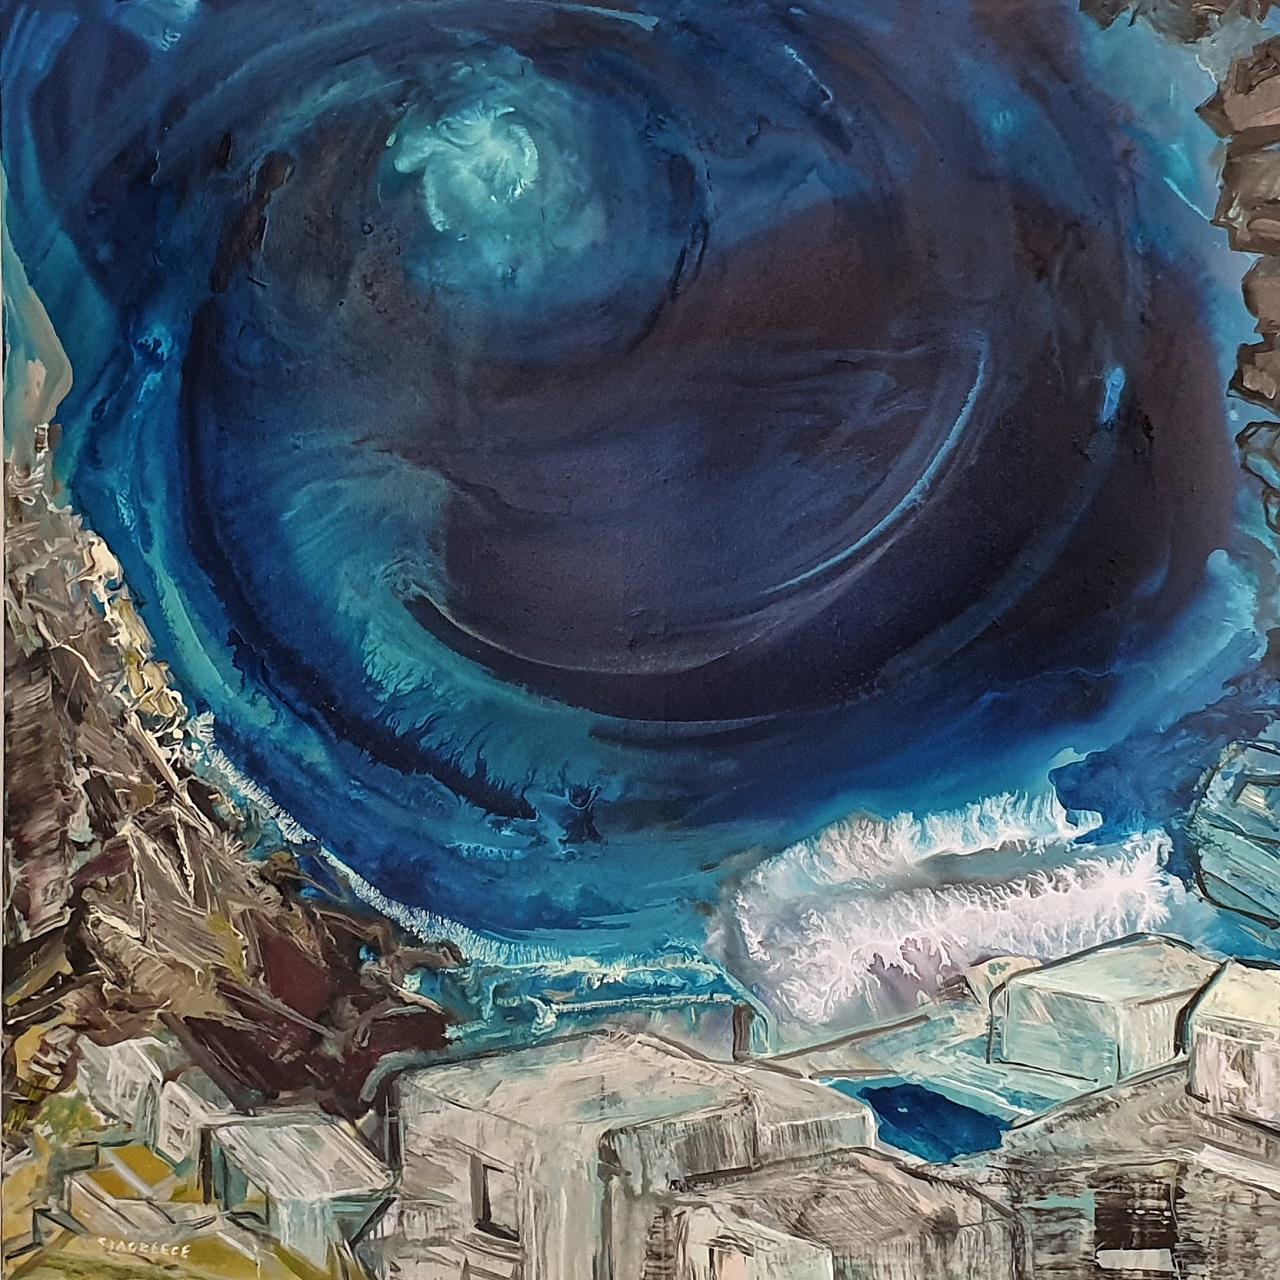 Panagiotis Siagris, In Appearance, water based varnish color on canvas, 100 x 100 cm, 2018